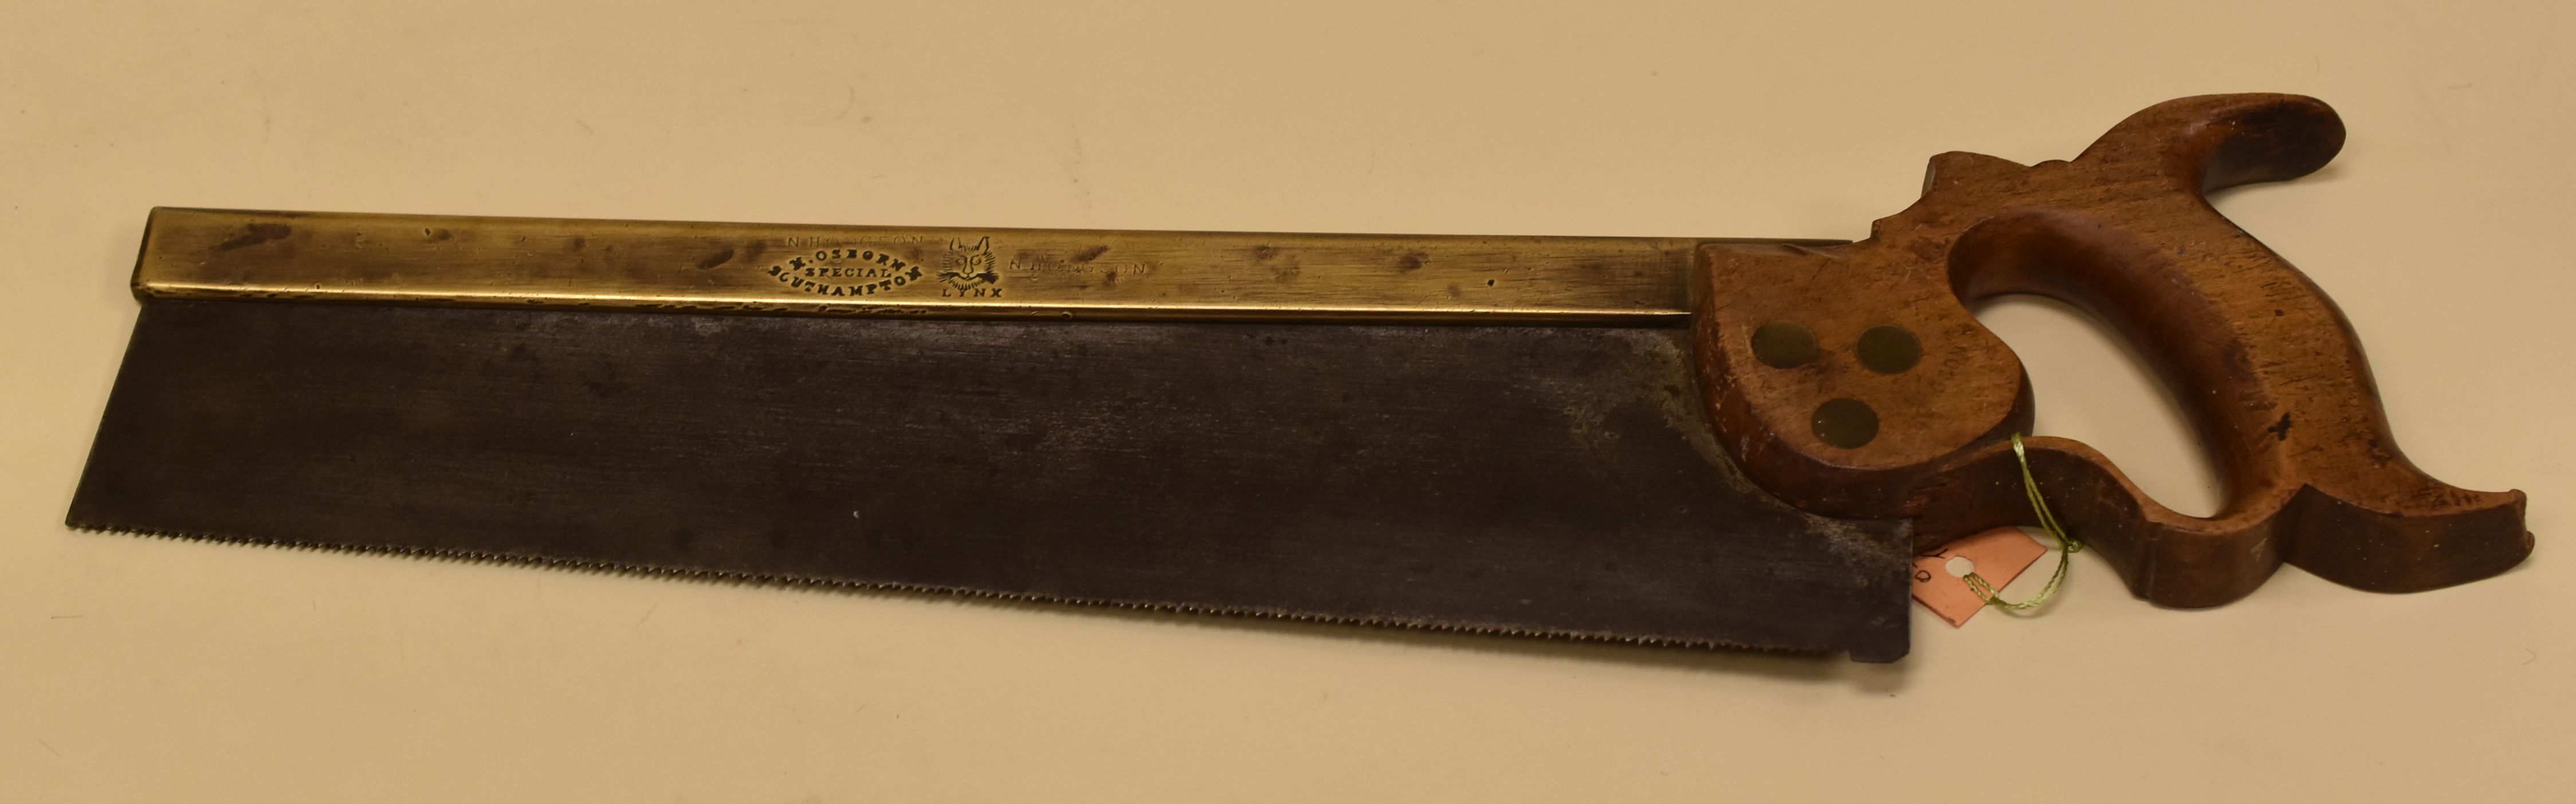 A VICTORIAN ENGLISH 'LYNX' TENON SAW having a curly beech wood handle, milled brass back and